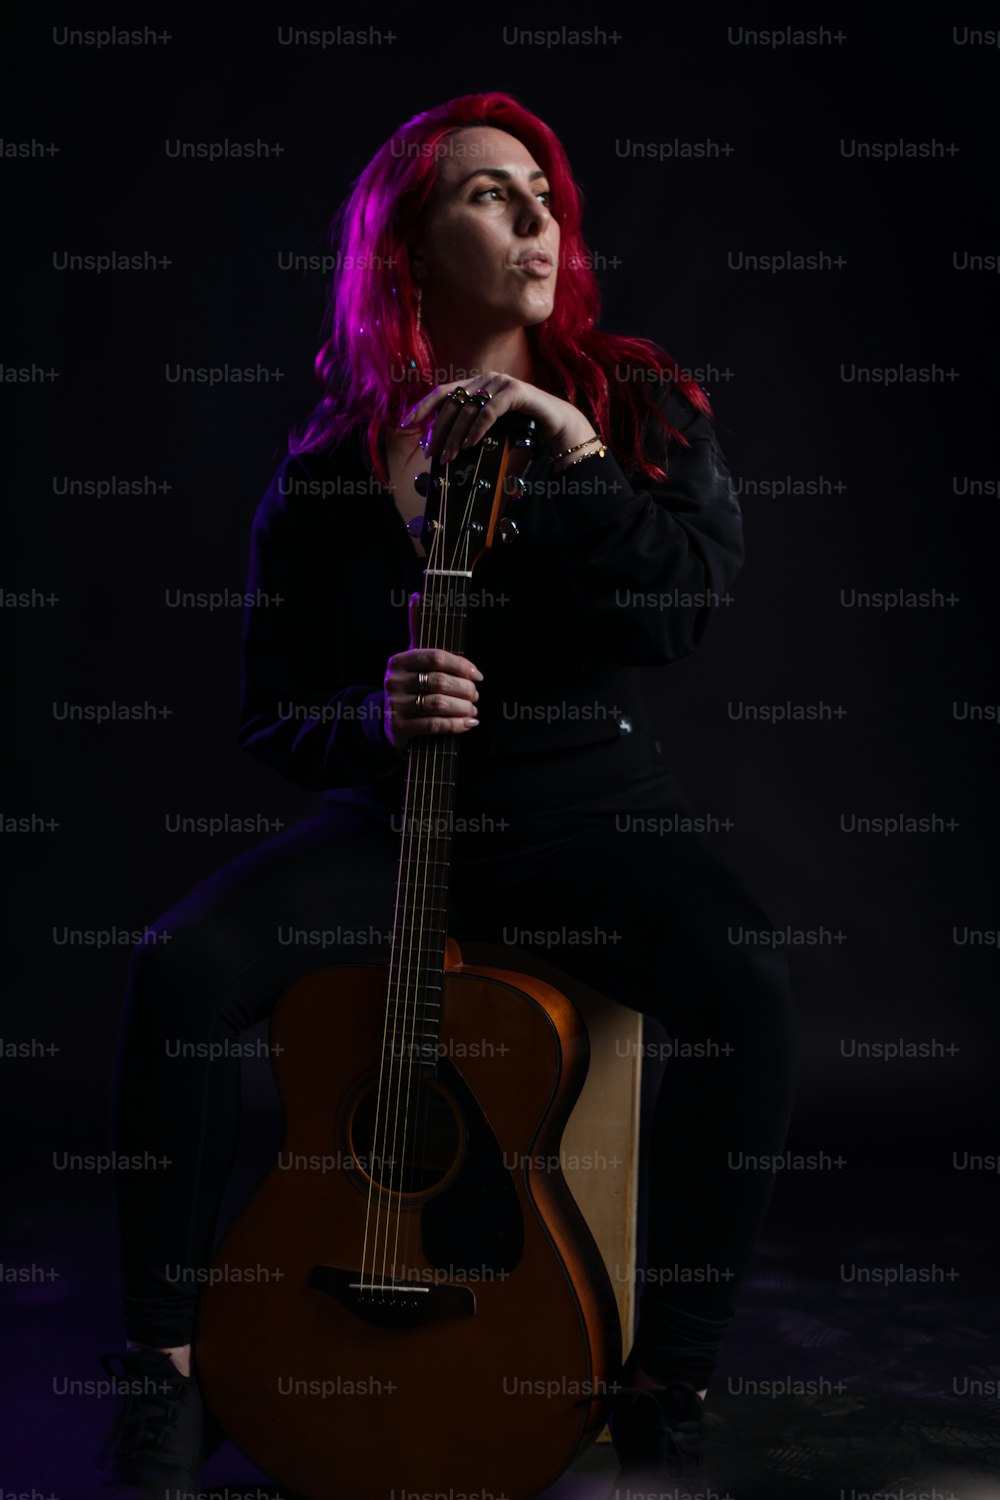 a woman with red hair sitting on a chair holding a guitar